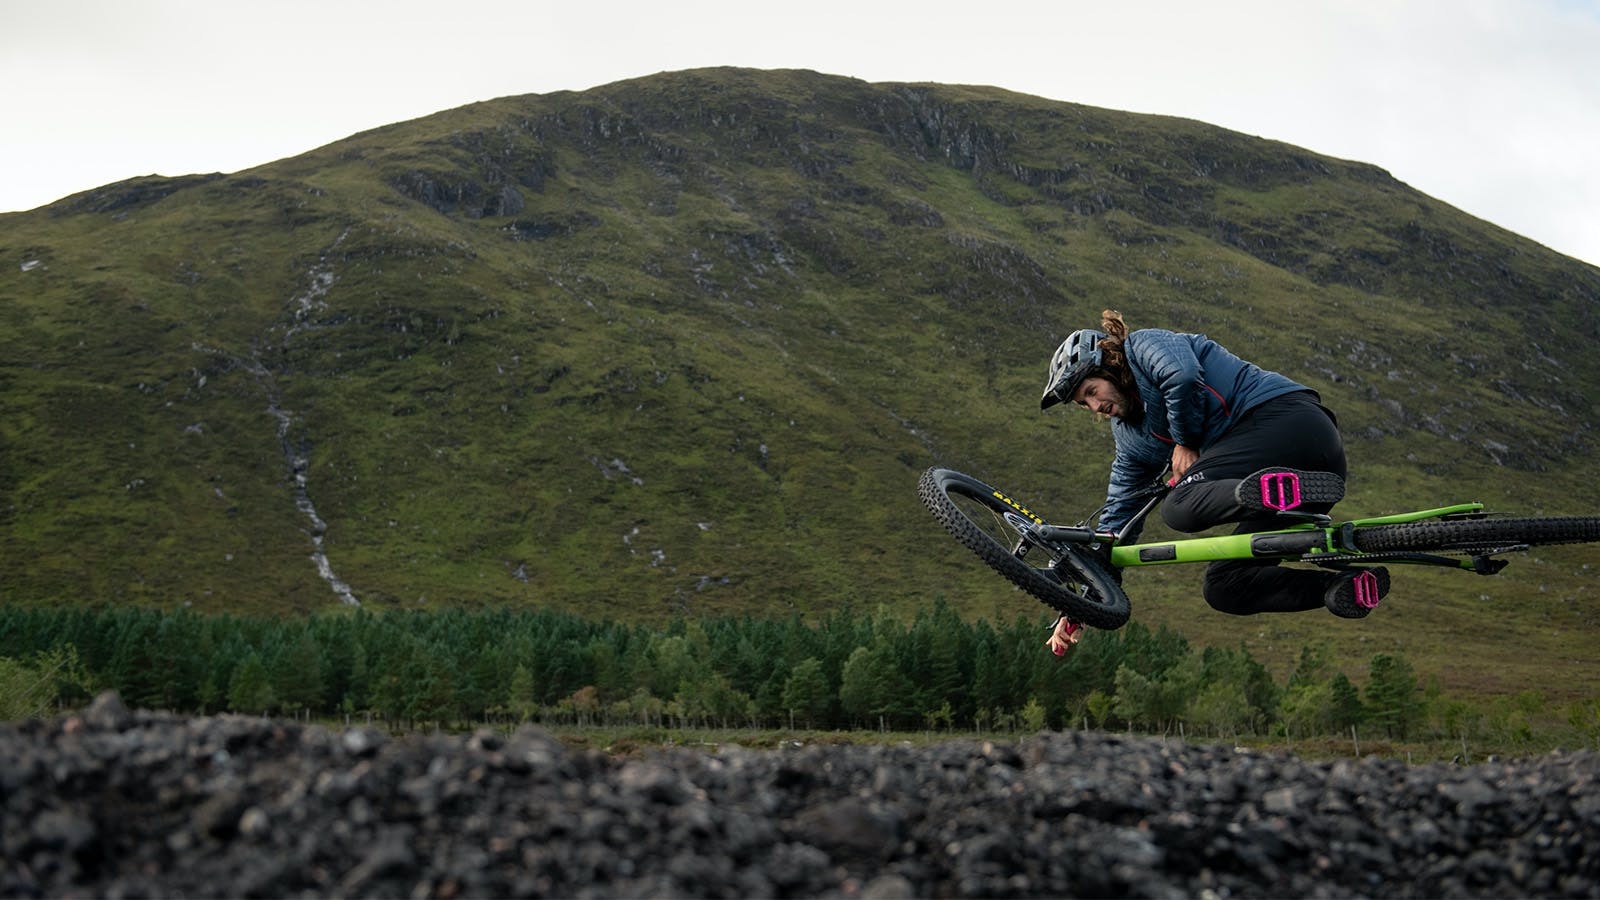 Free Agent rider Sam Dale jumping his Nomad